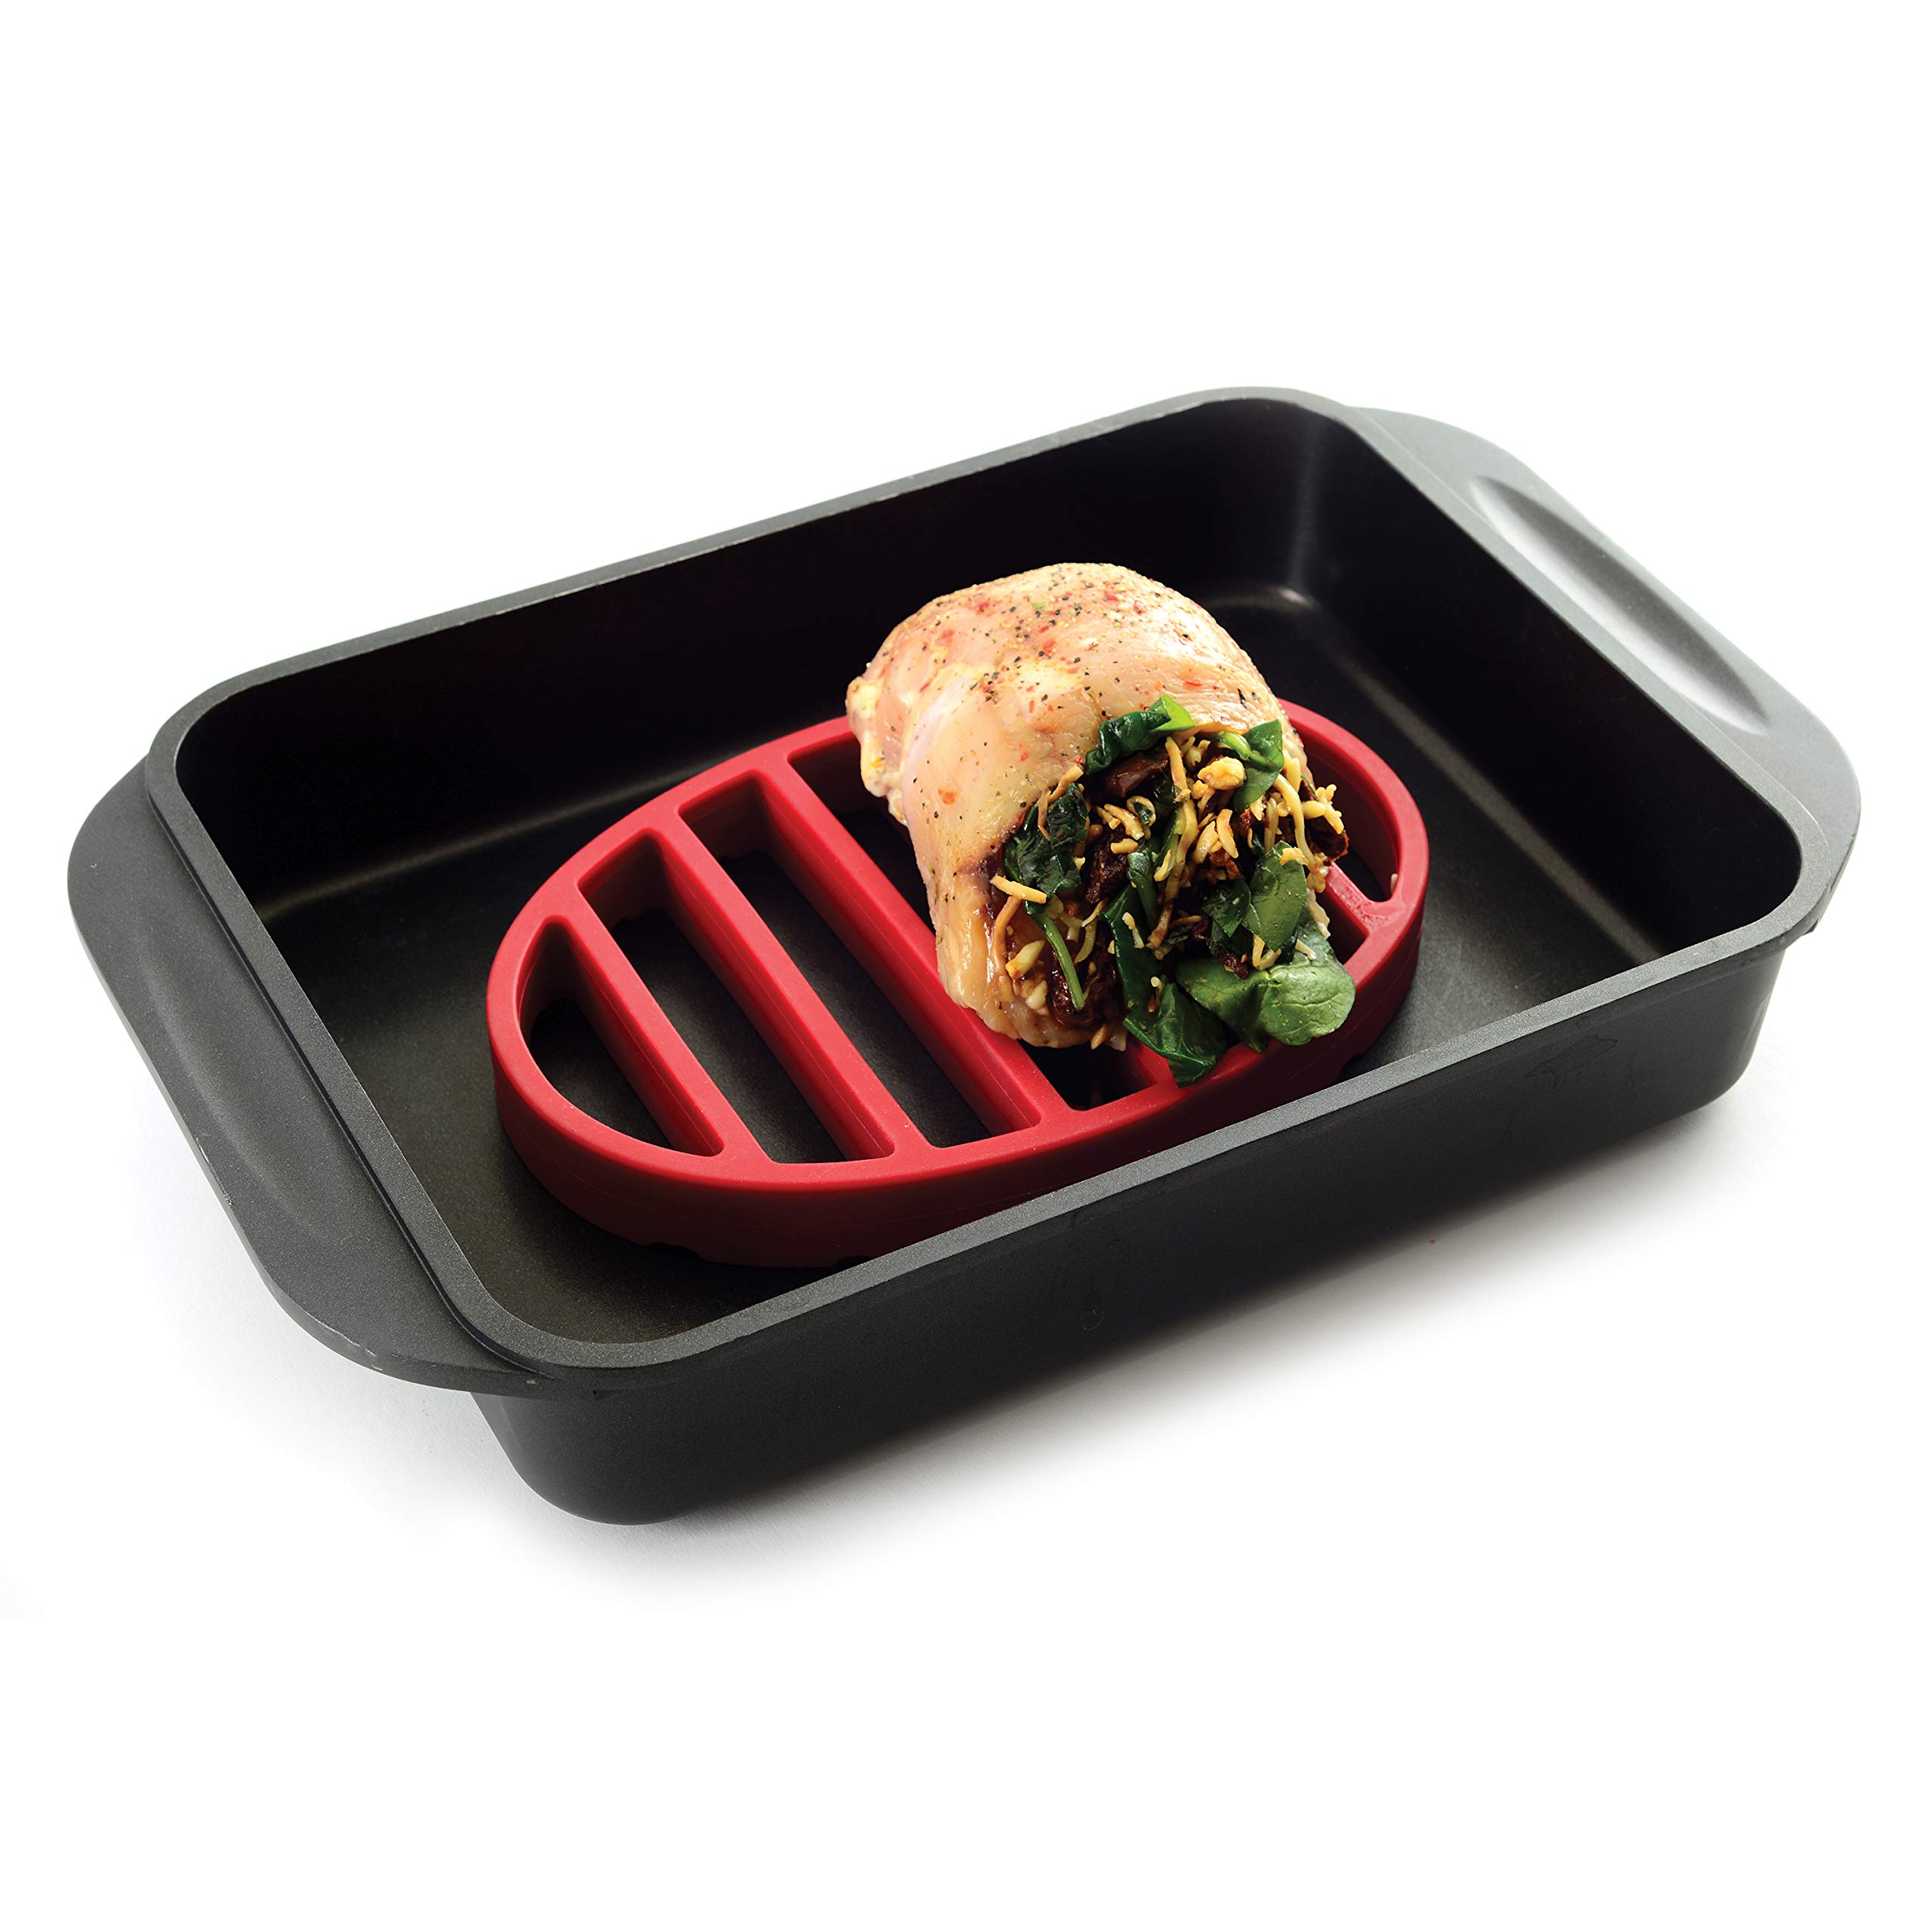 Norpro 405 Oval Silicone Roast Rack, Red